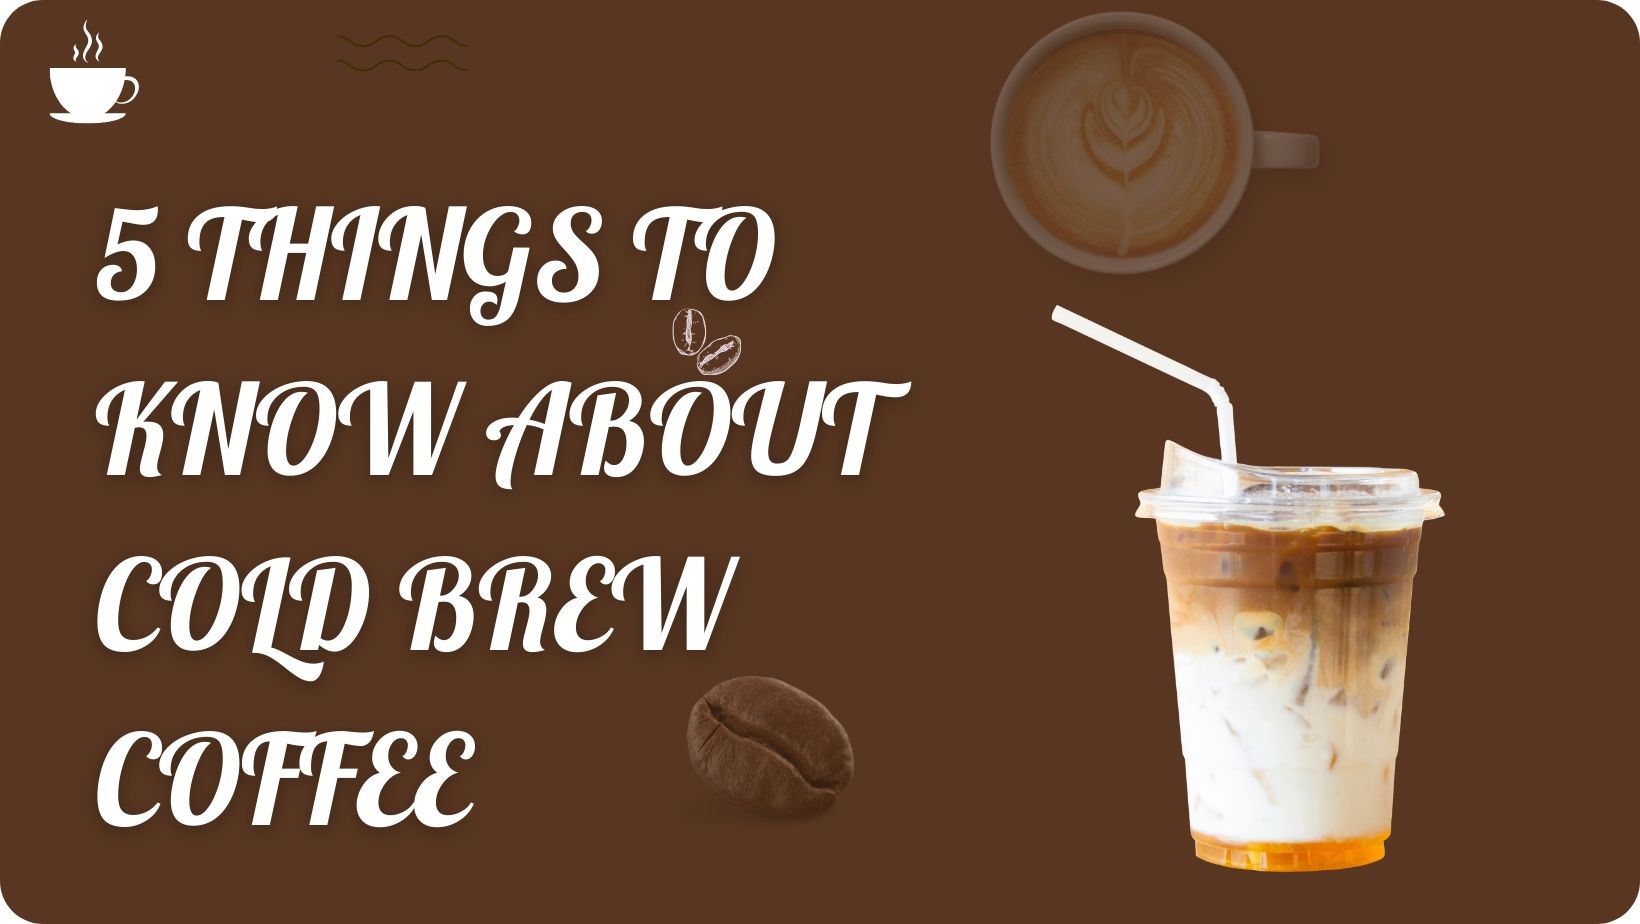 5 THINGS TO KNOW ABOUT COLD BREW COFFEE